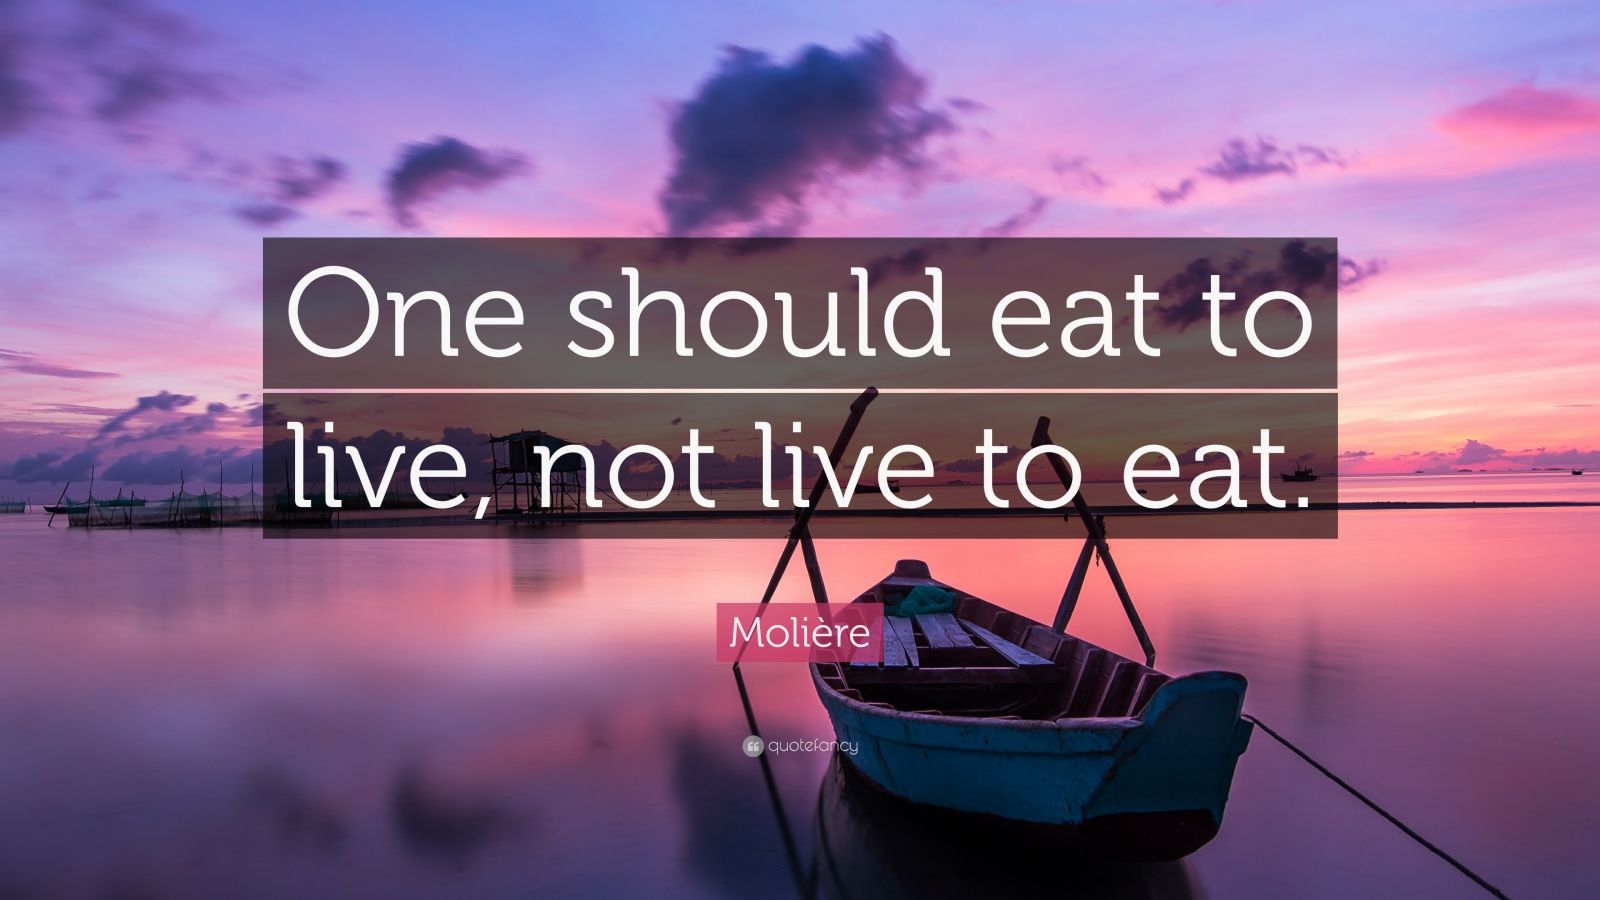 Molière Quote: “One should eat to live, not live to eat.”